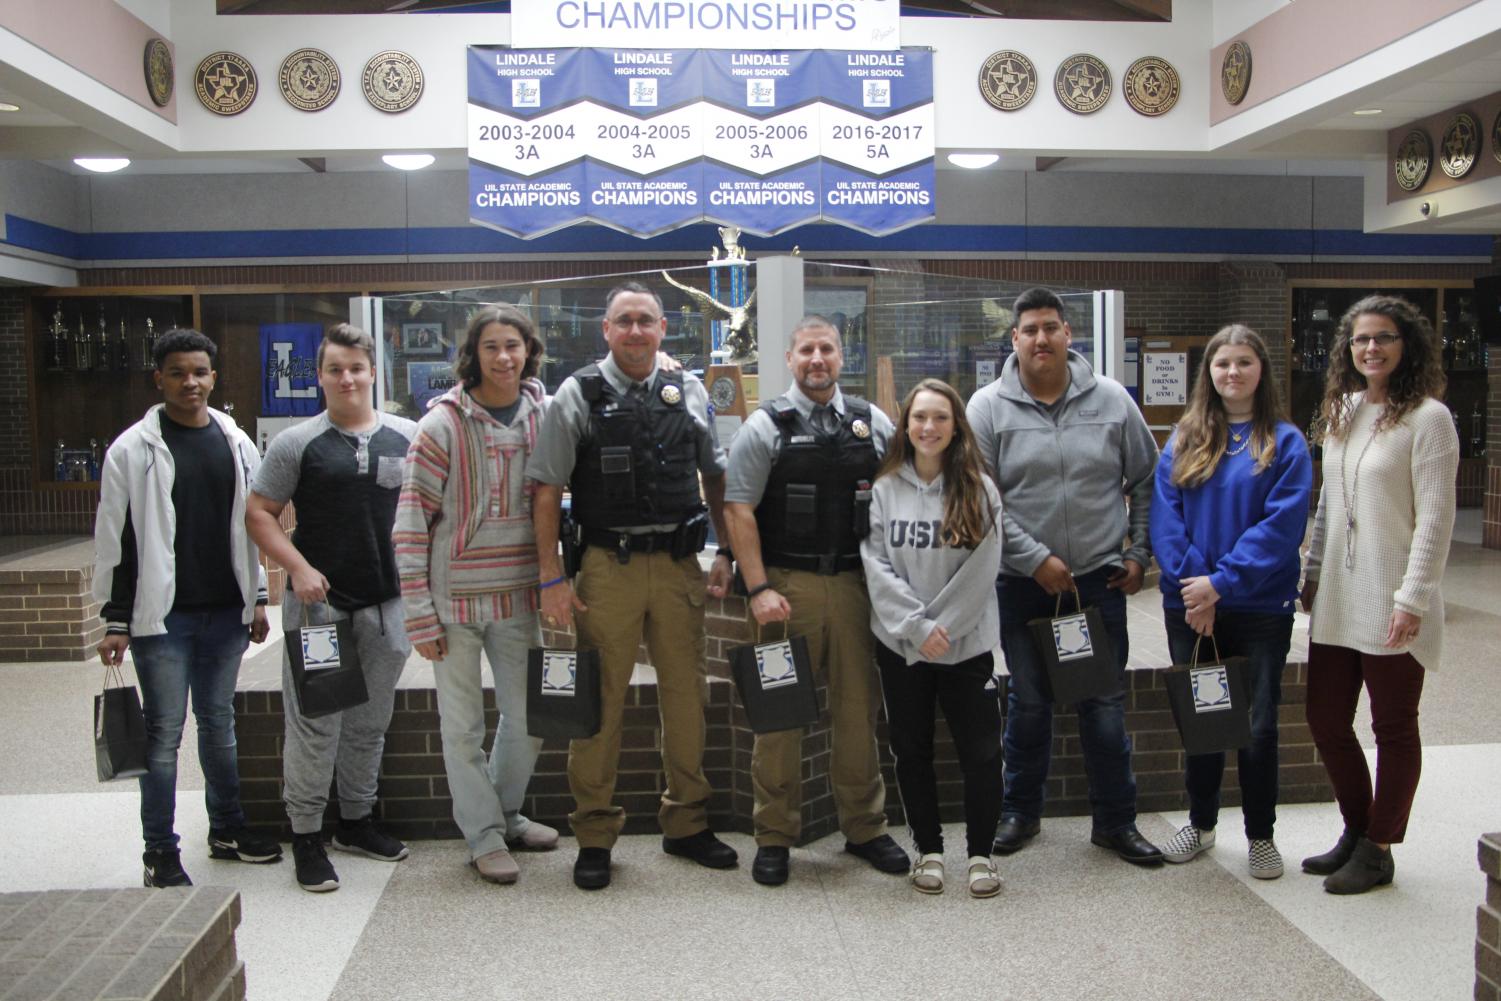 The Law Enforcement class poses while giving the campus police officers a goodie bag. This was to show support to the local police officers on National Law Enforcement Day.